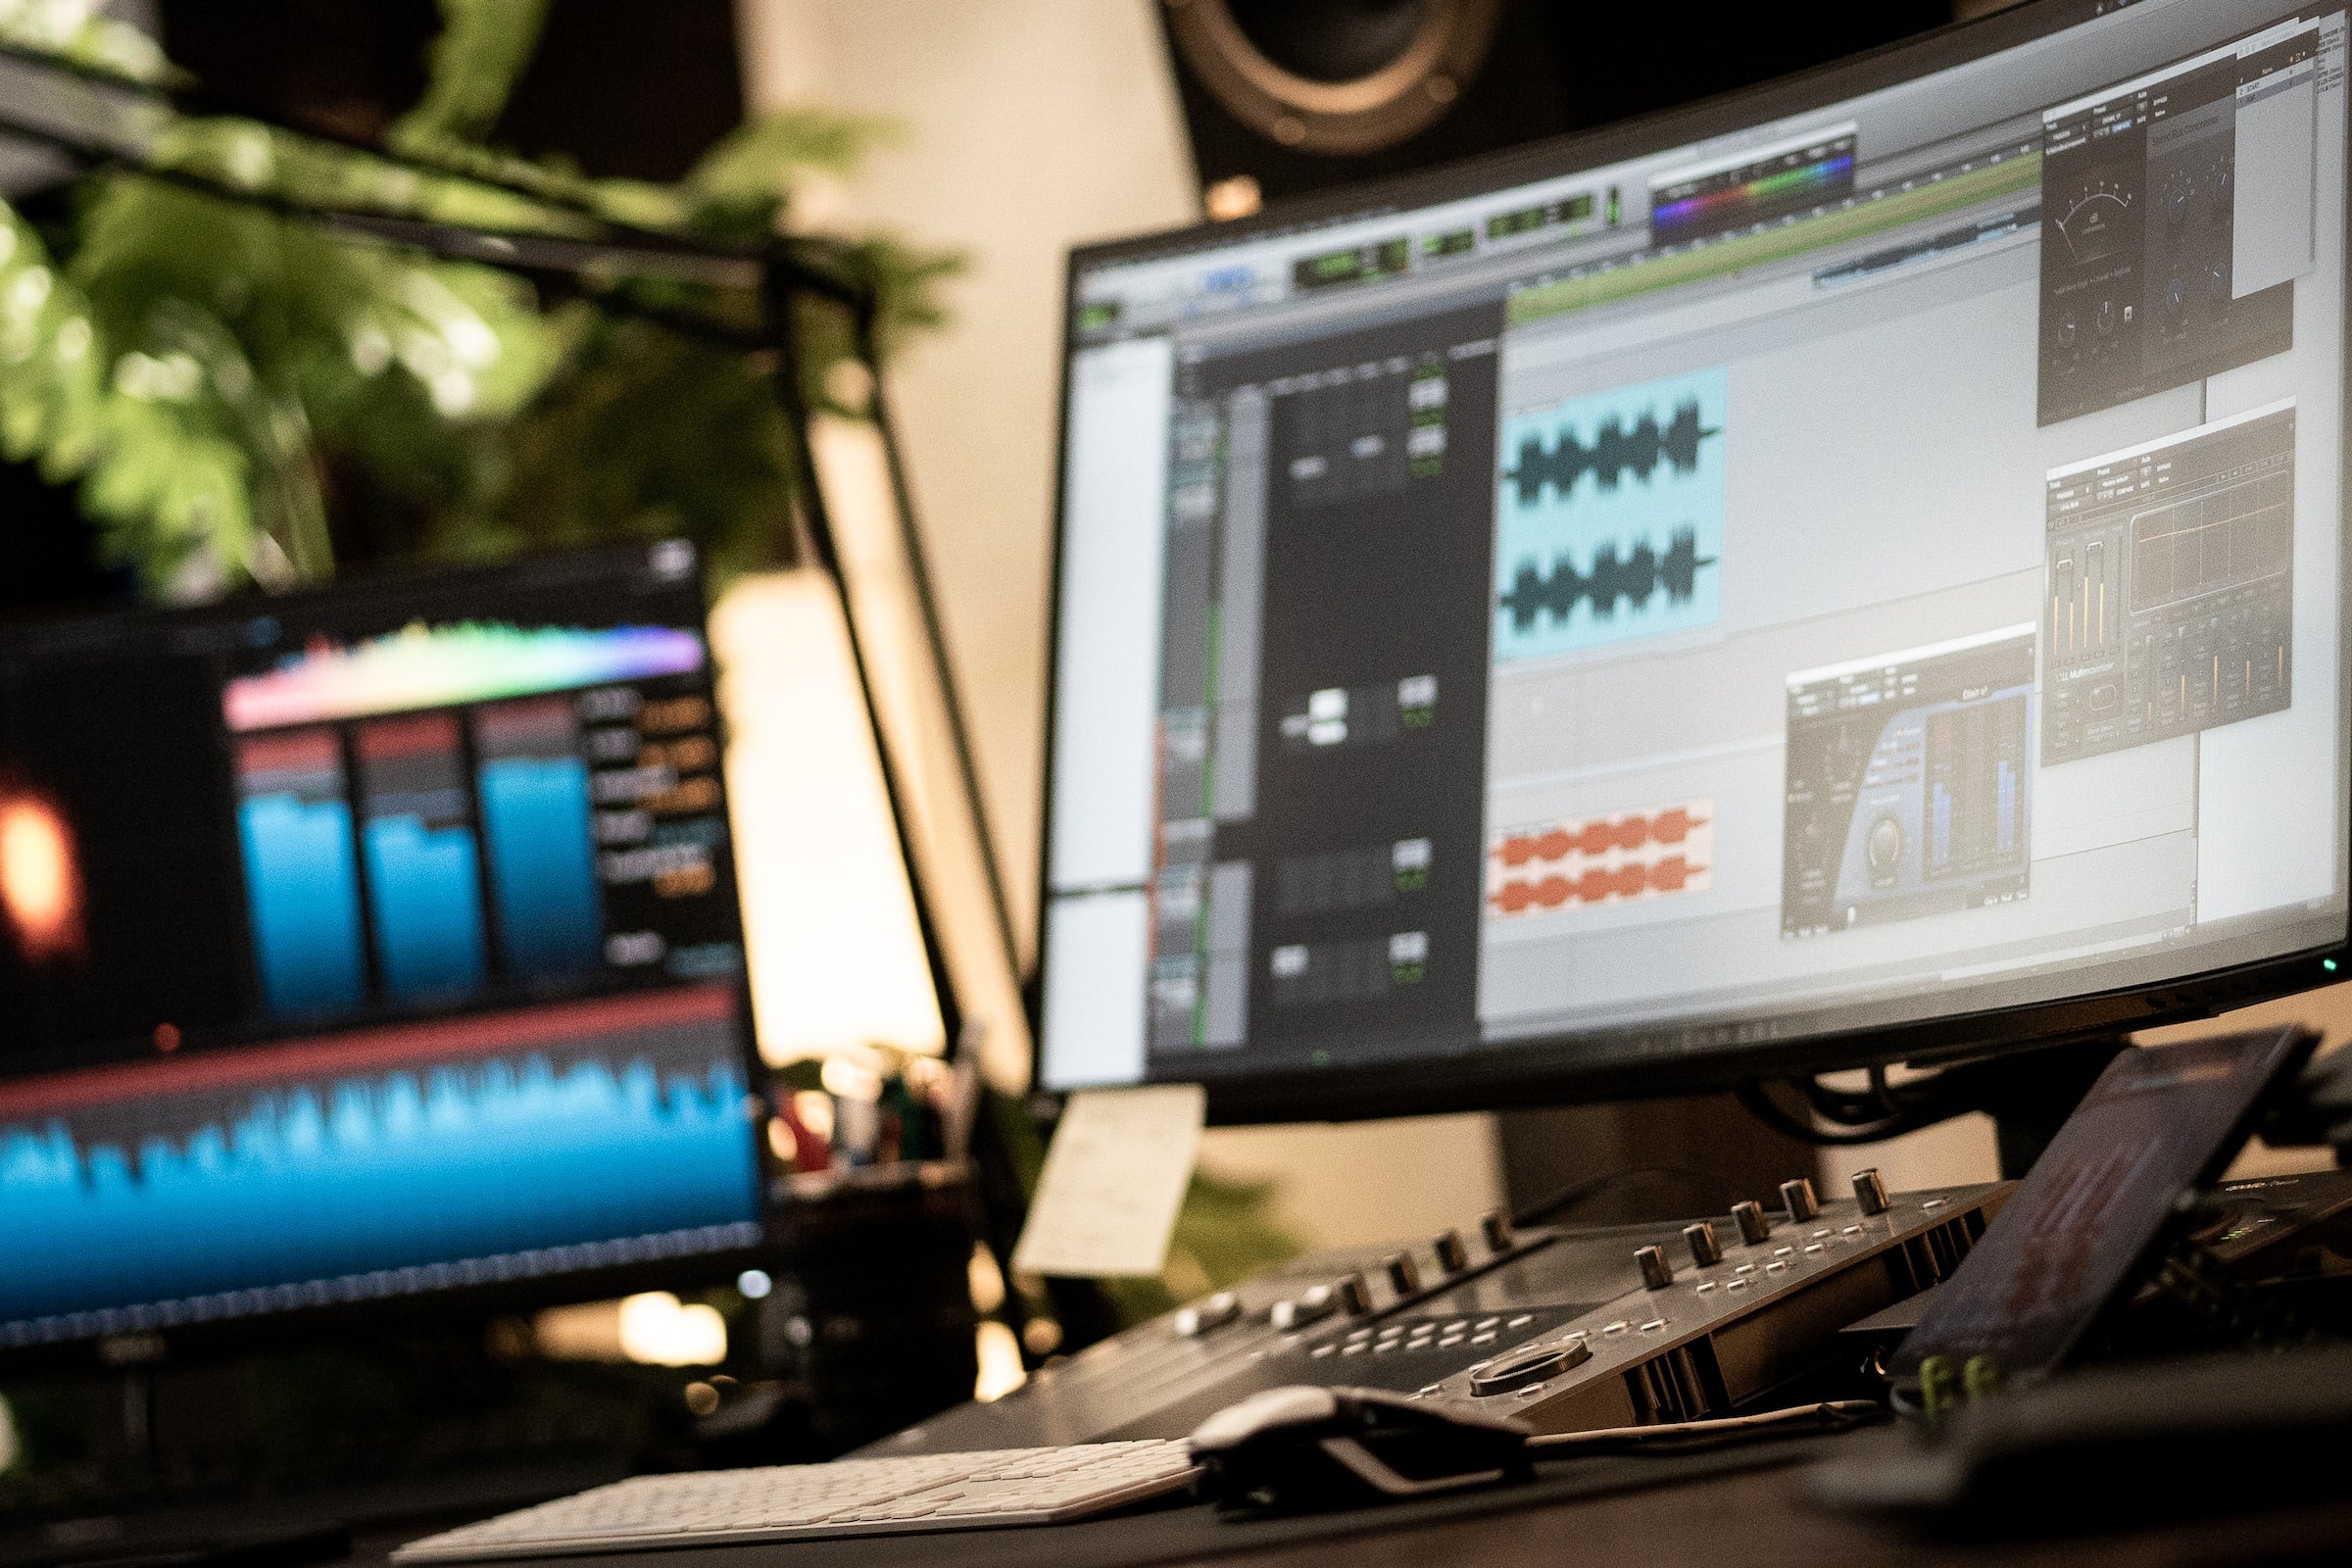 Why Mastering is Important for Distribution